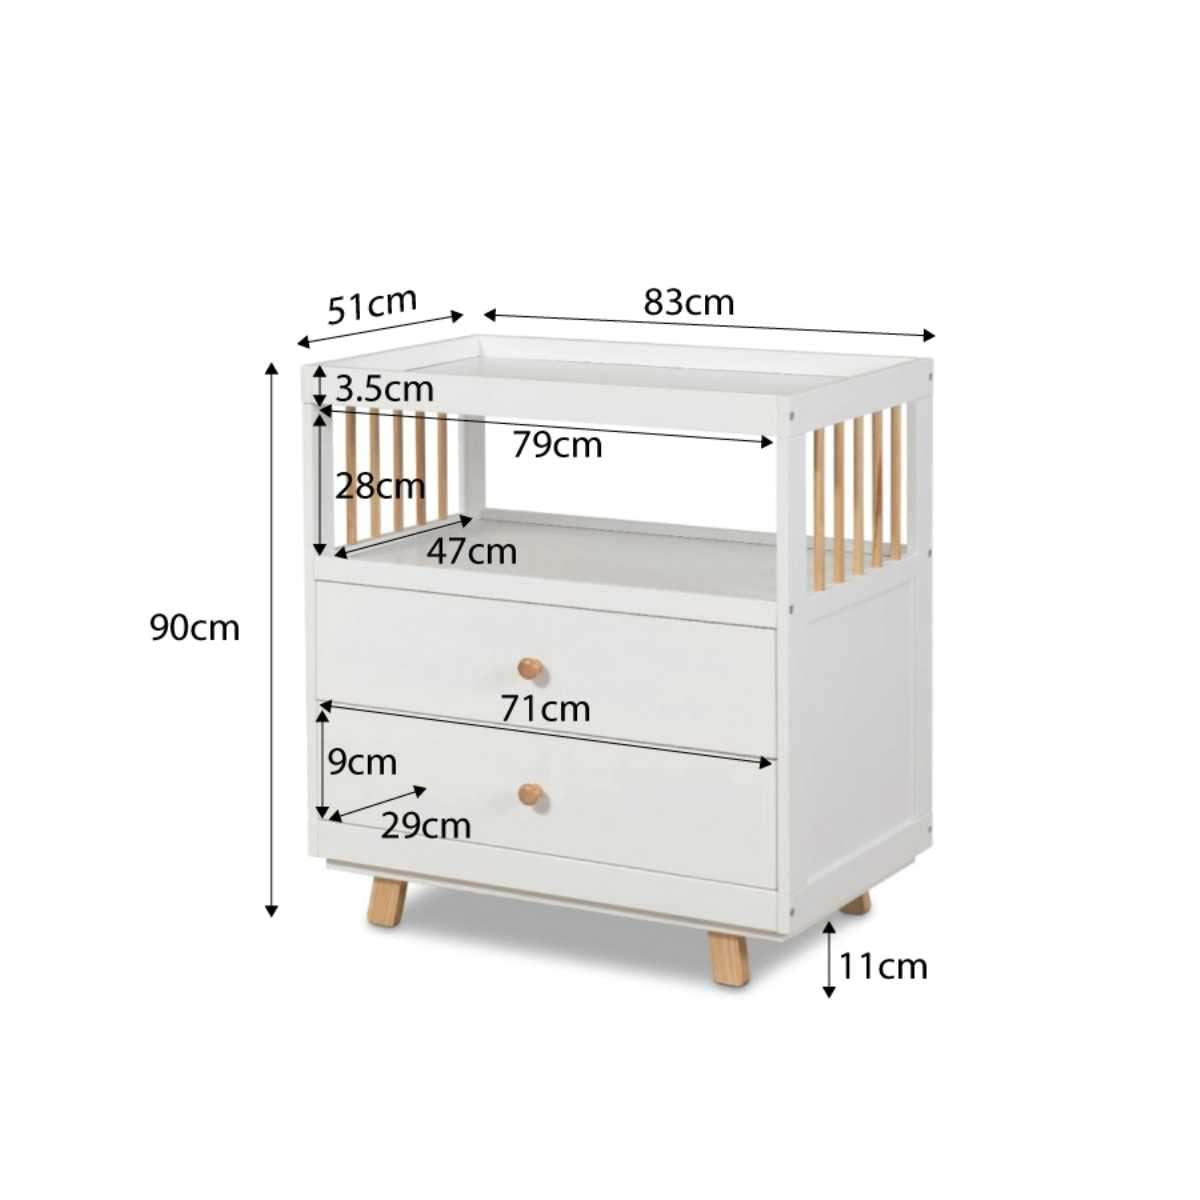 Aspen Change Table with Drawers - White/Natural